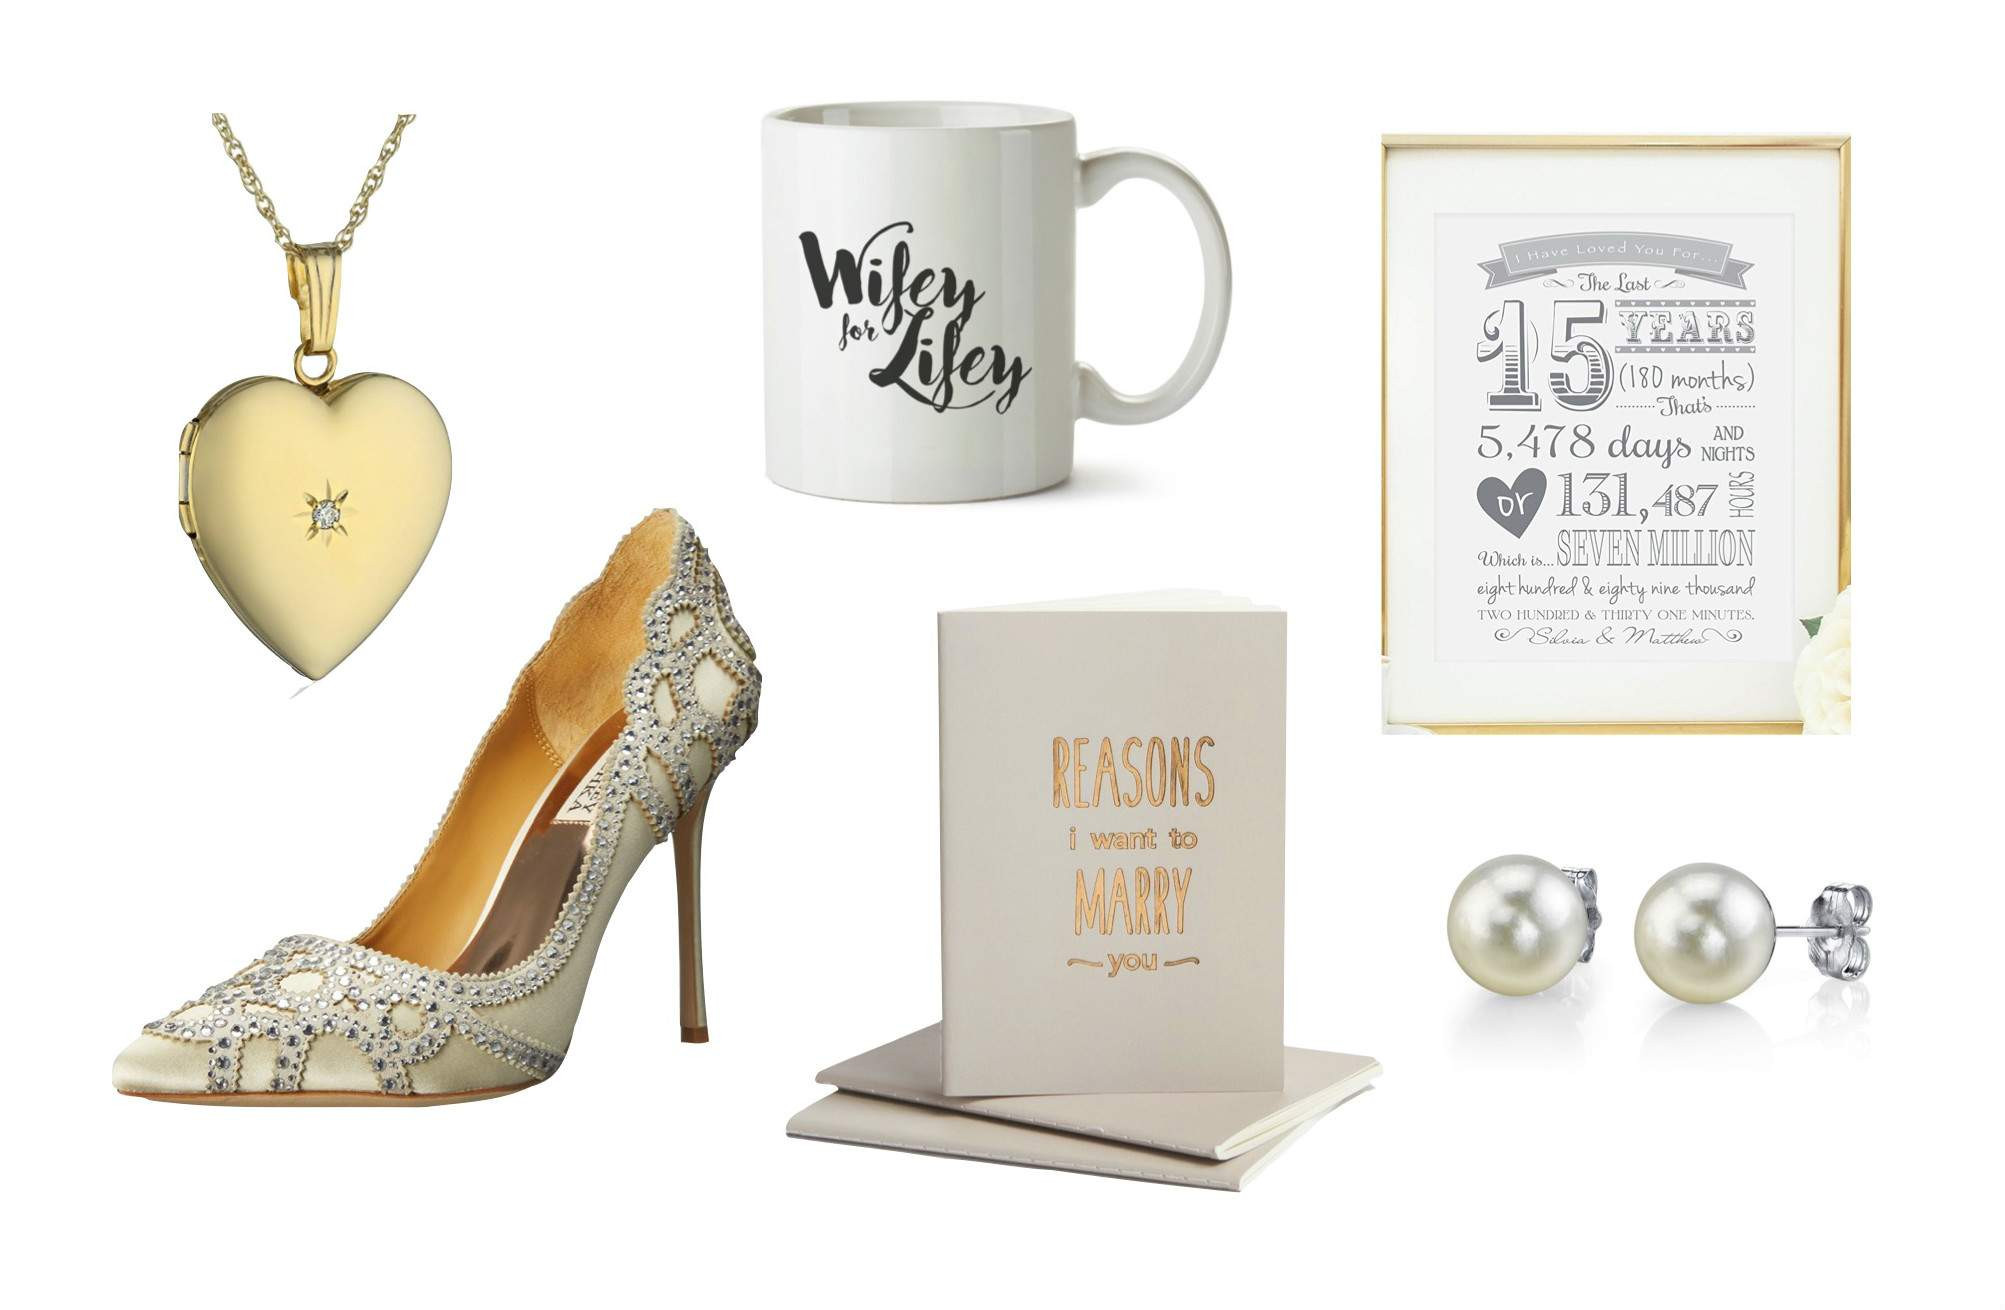 Wedding Gift From Groom To Bride Ideas
 Best Wedding Day Gift Ideas From the Groom to the Bride